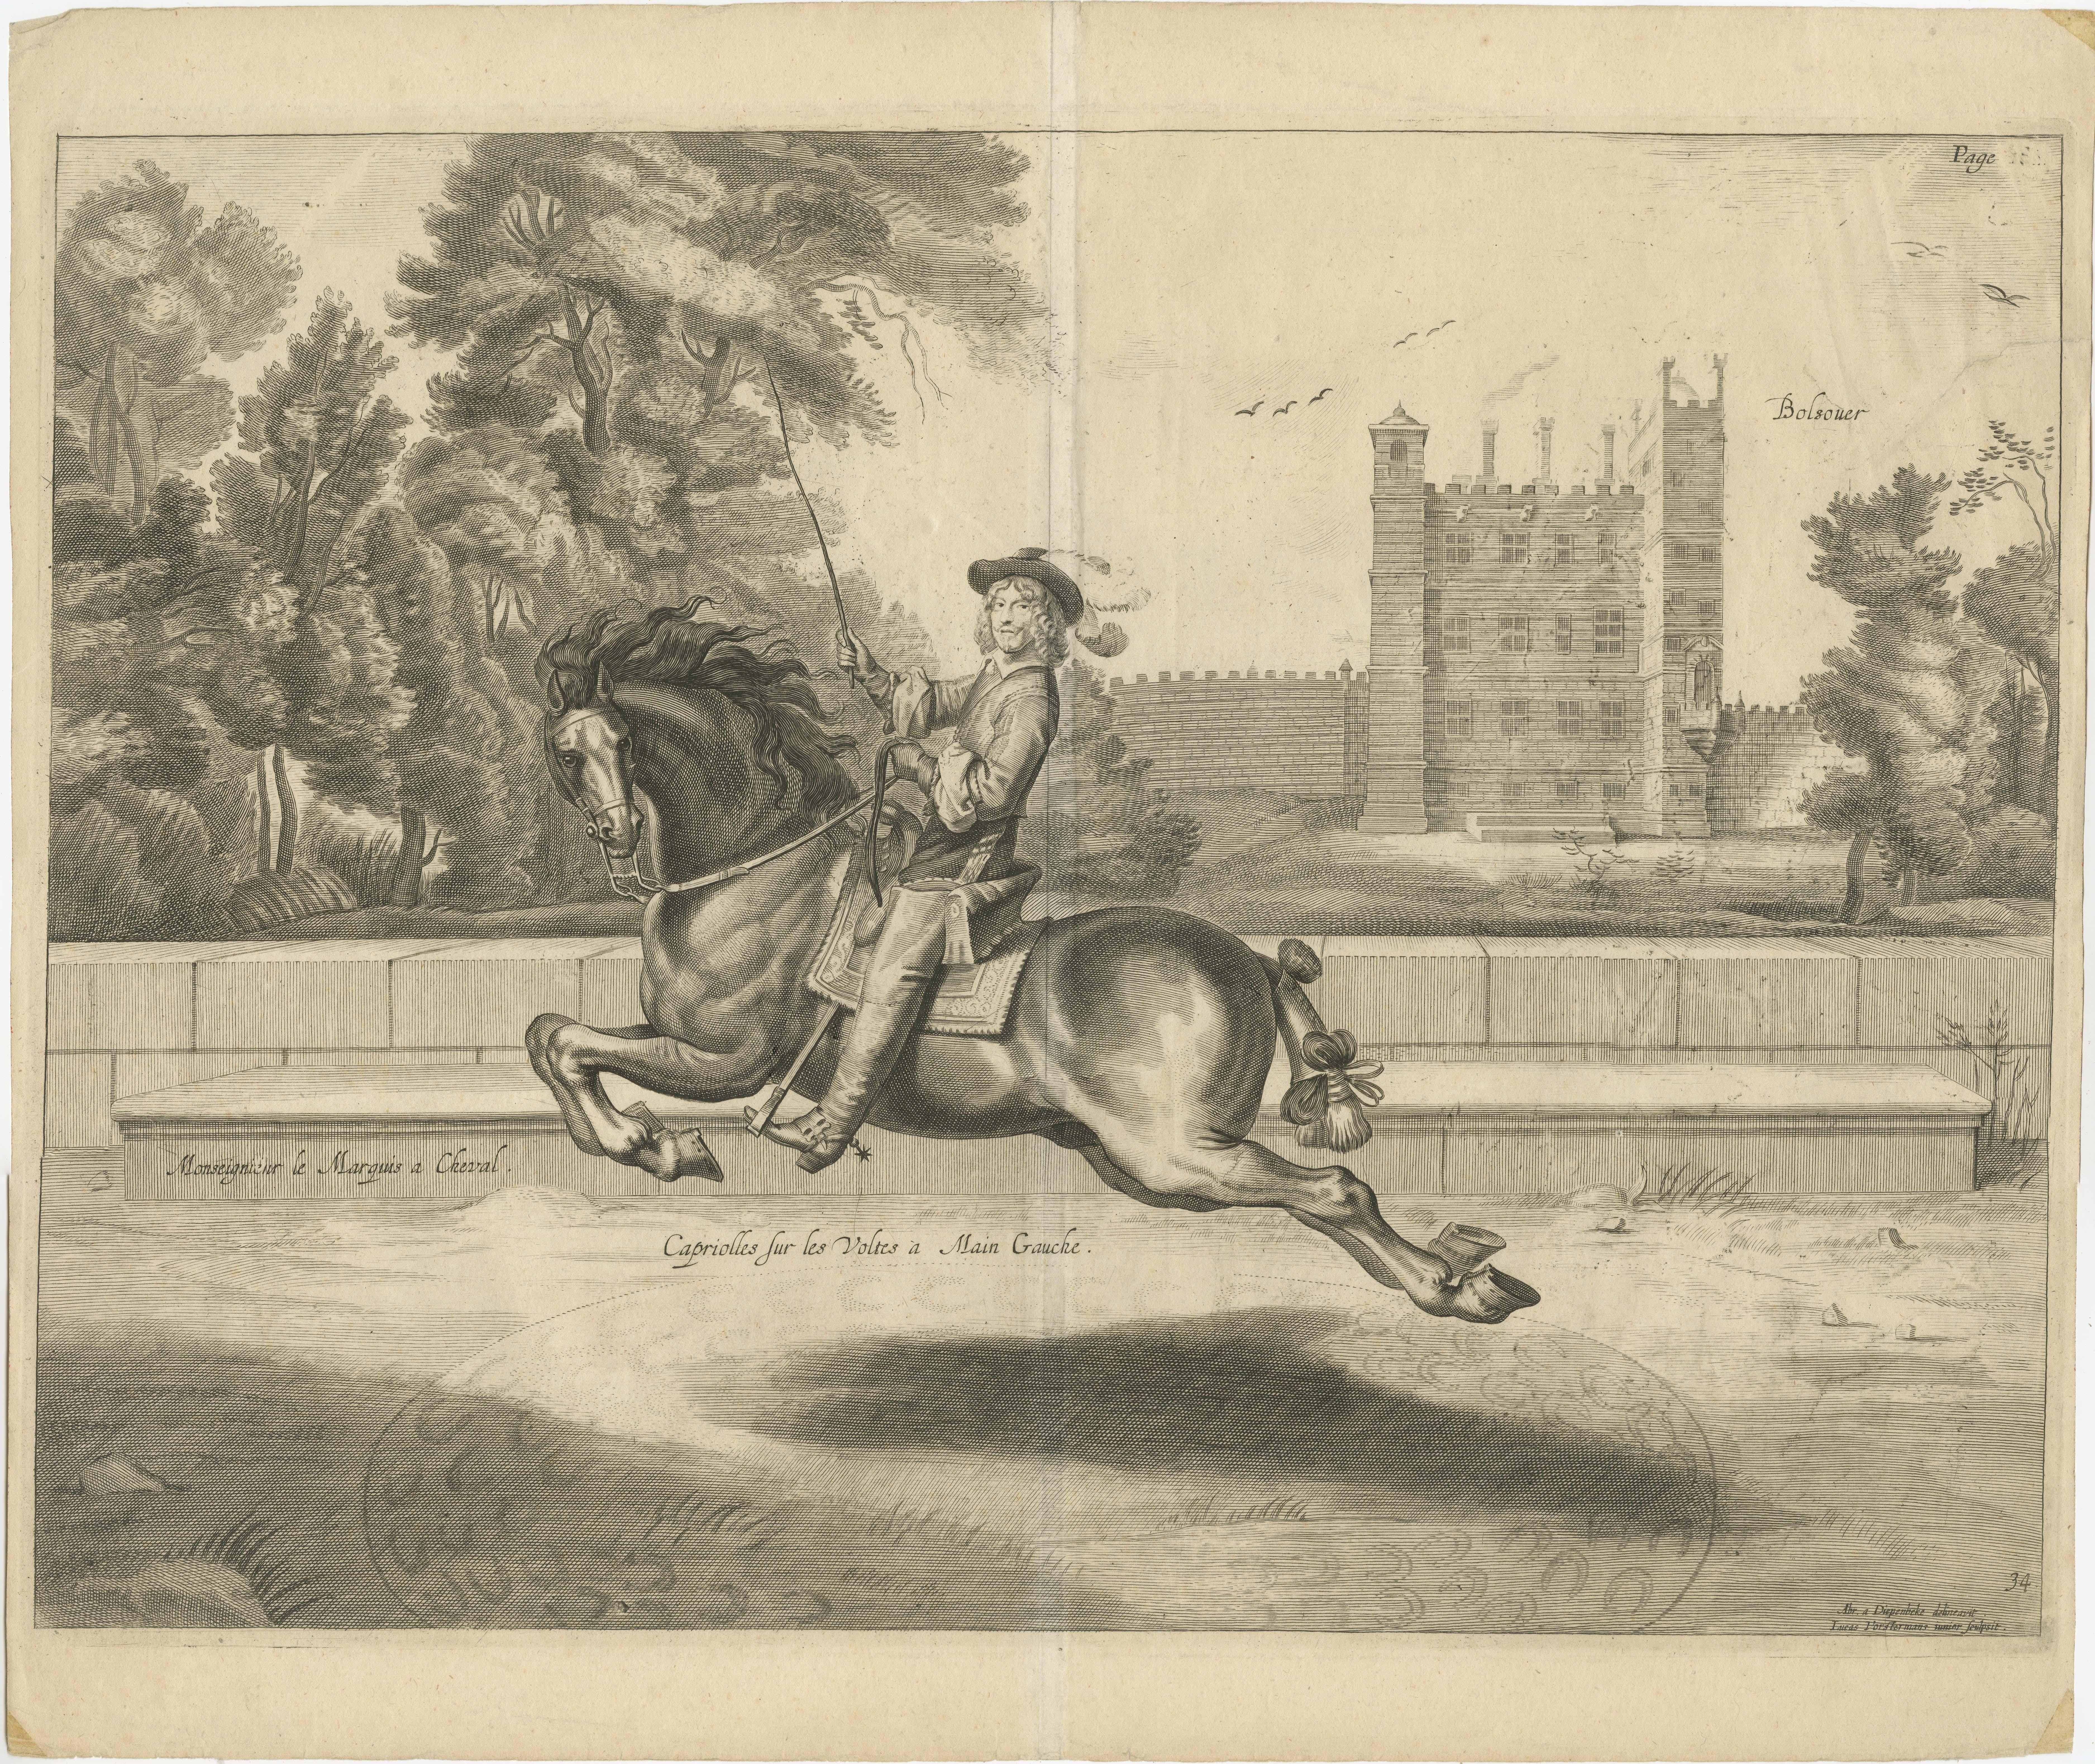 Antique print titled 'Capriolles sur les Voltes à Main Gauche'. Original old print of a nobleman galloping past Bolsover Castle in Derbyshire. This print originates from the 1737 English edition of Cavendish's exposition on the theory and practice